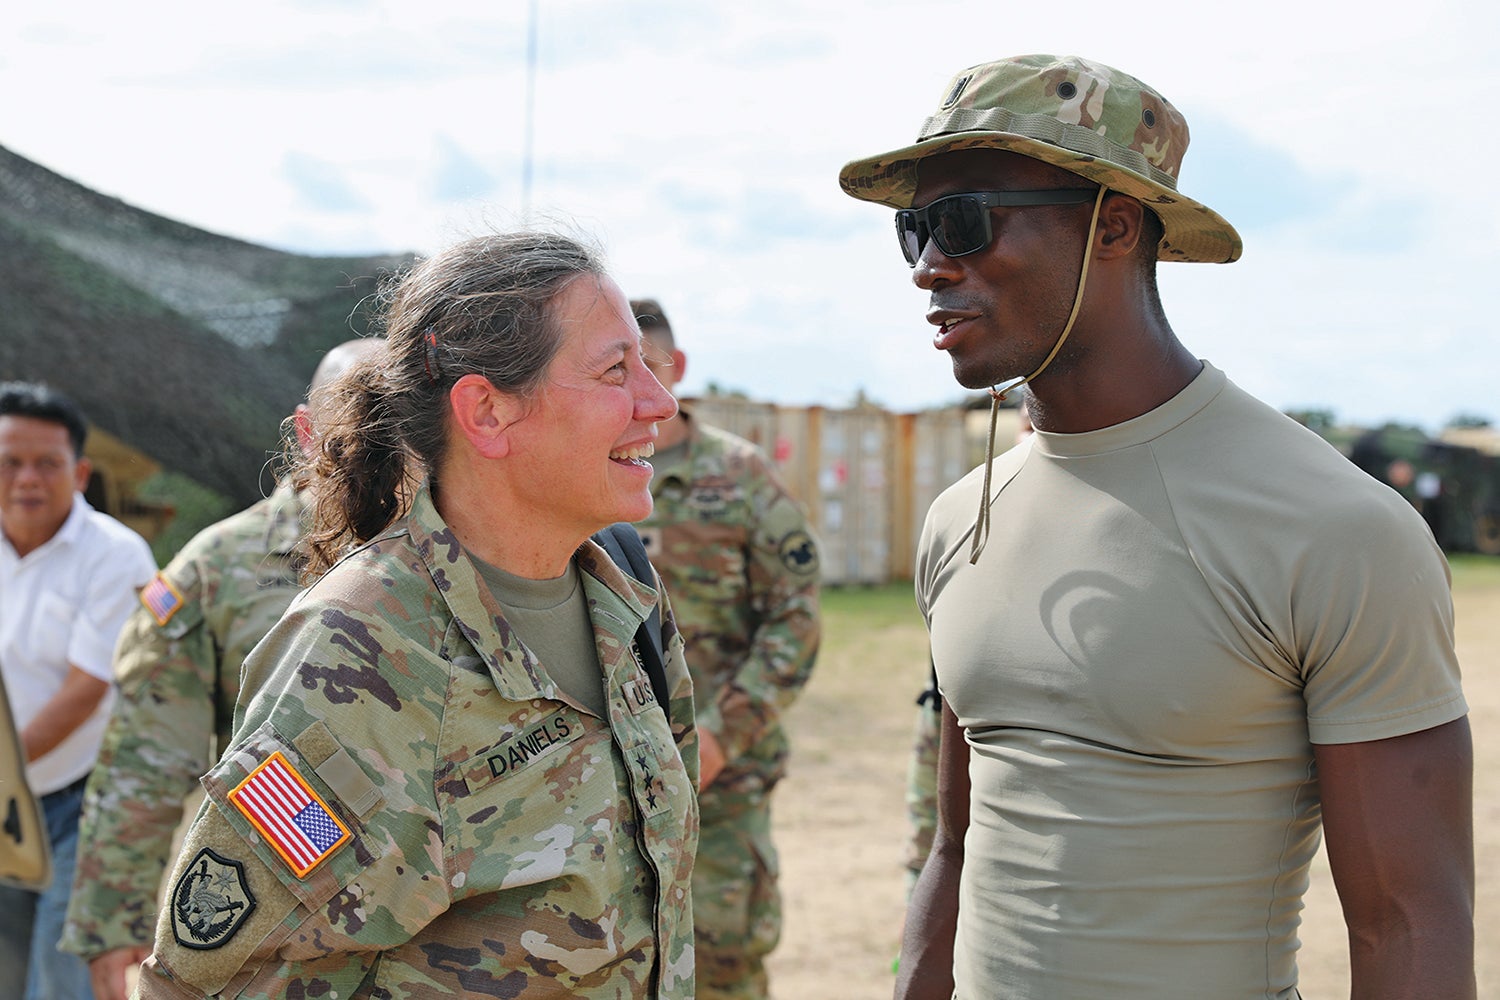 Lt. Gen. Jody Daniels, left, chief of the U.S. Army Reserve and commanding general of the U.S. Army Reserve Command, speaks with 1st Lt. Amos Lamah of the 3rd Battalion, 25th Aviation Regiment, during a bilateral exercise in Lop Buri, Thailand. (Credit: U.S. Army/Sgt. 1st Class Joseph VonNida)